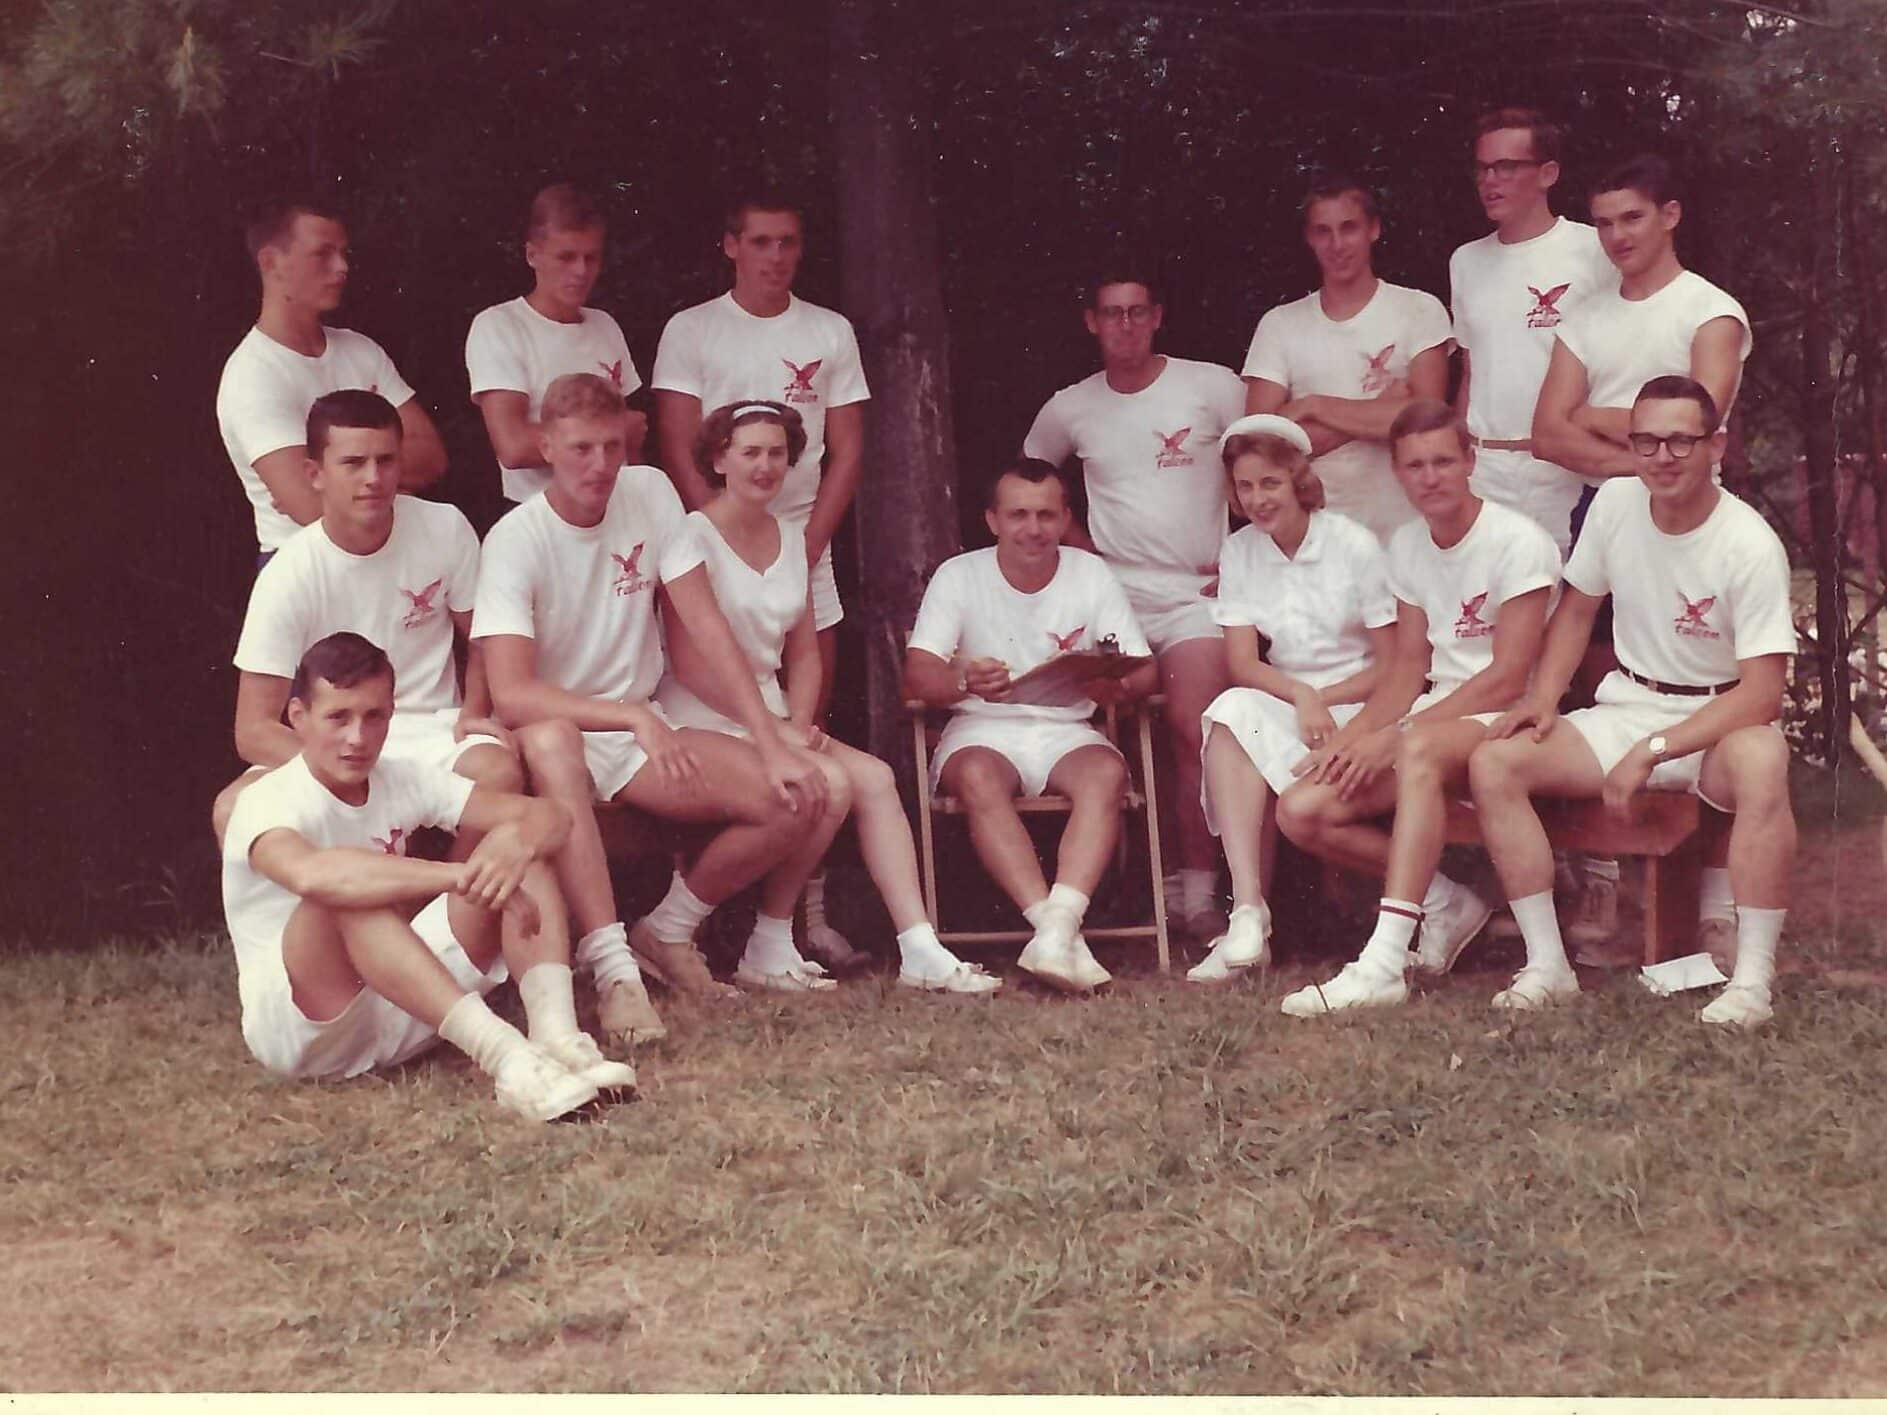 A staff photo from 1961